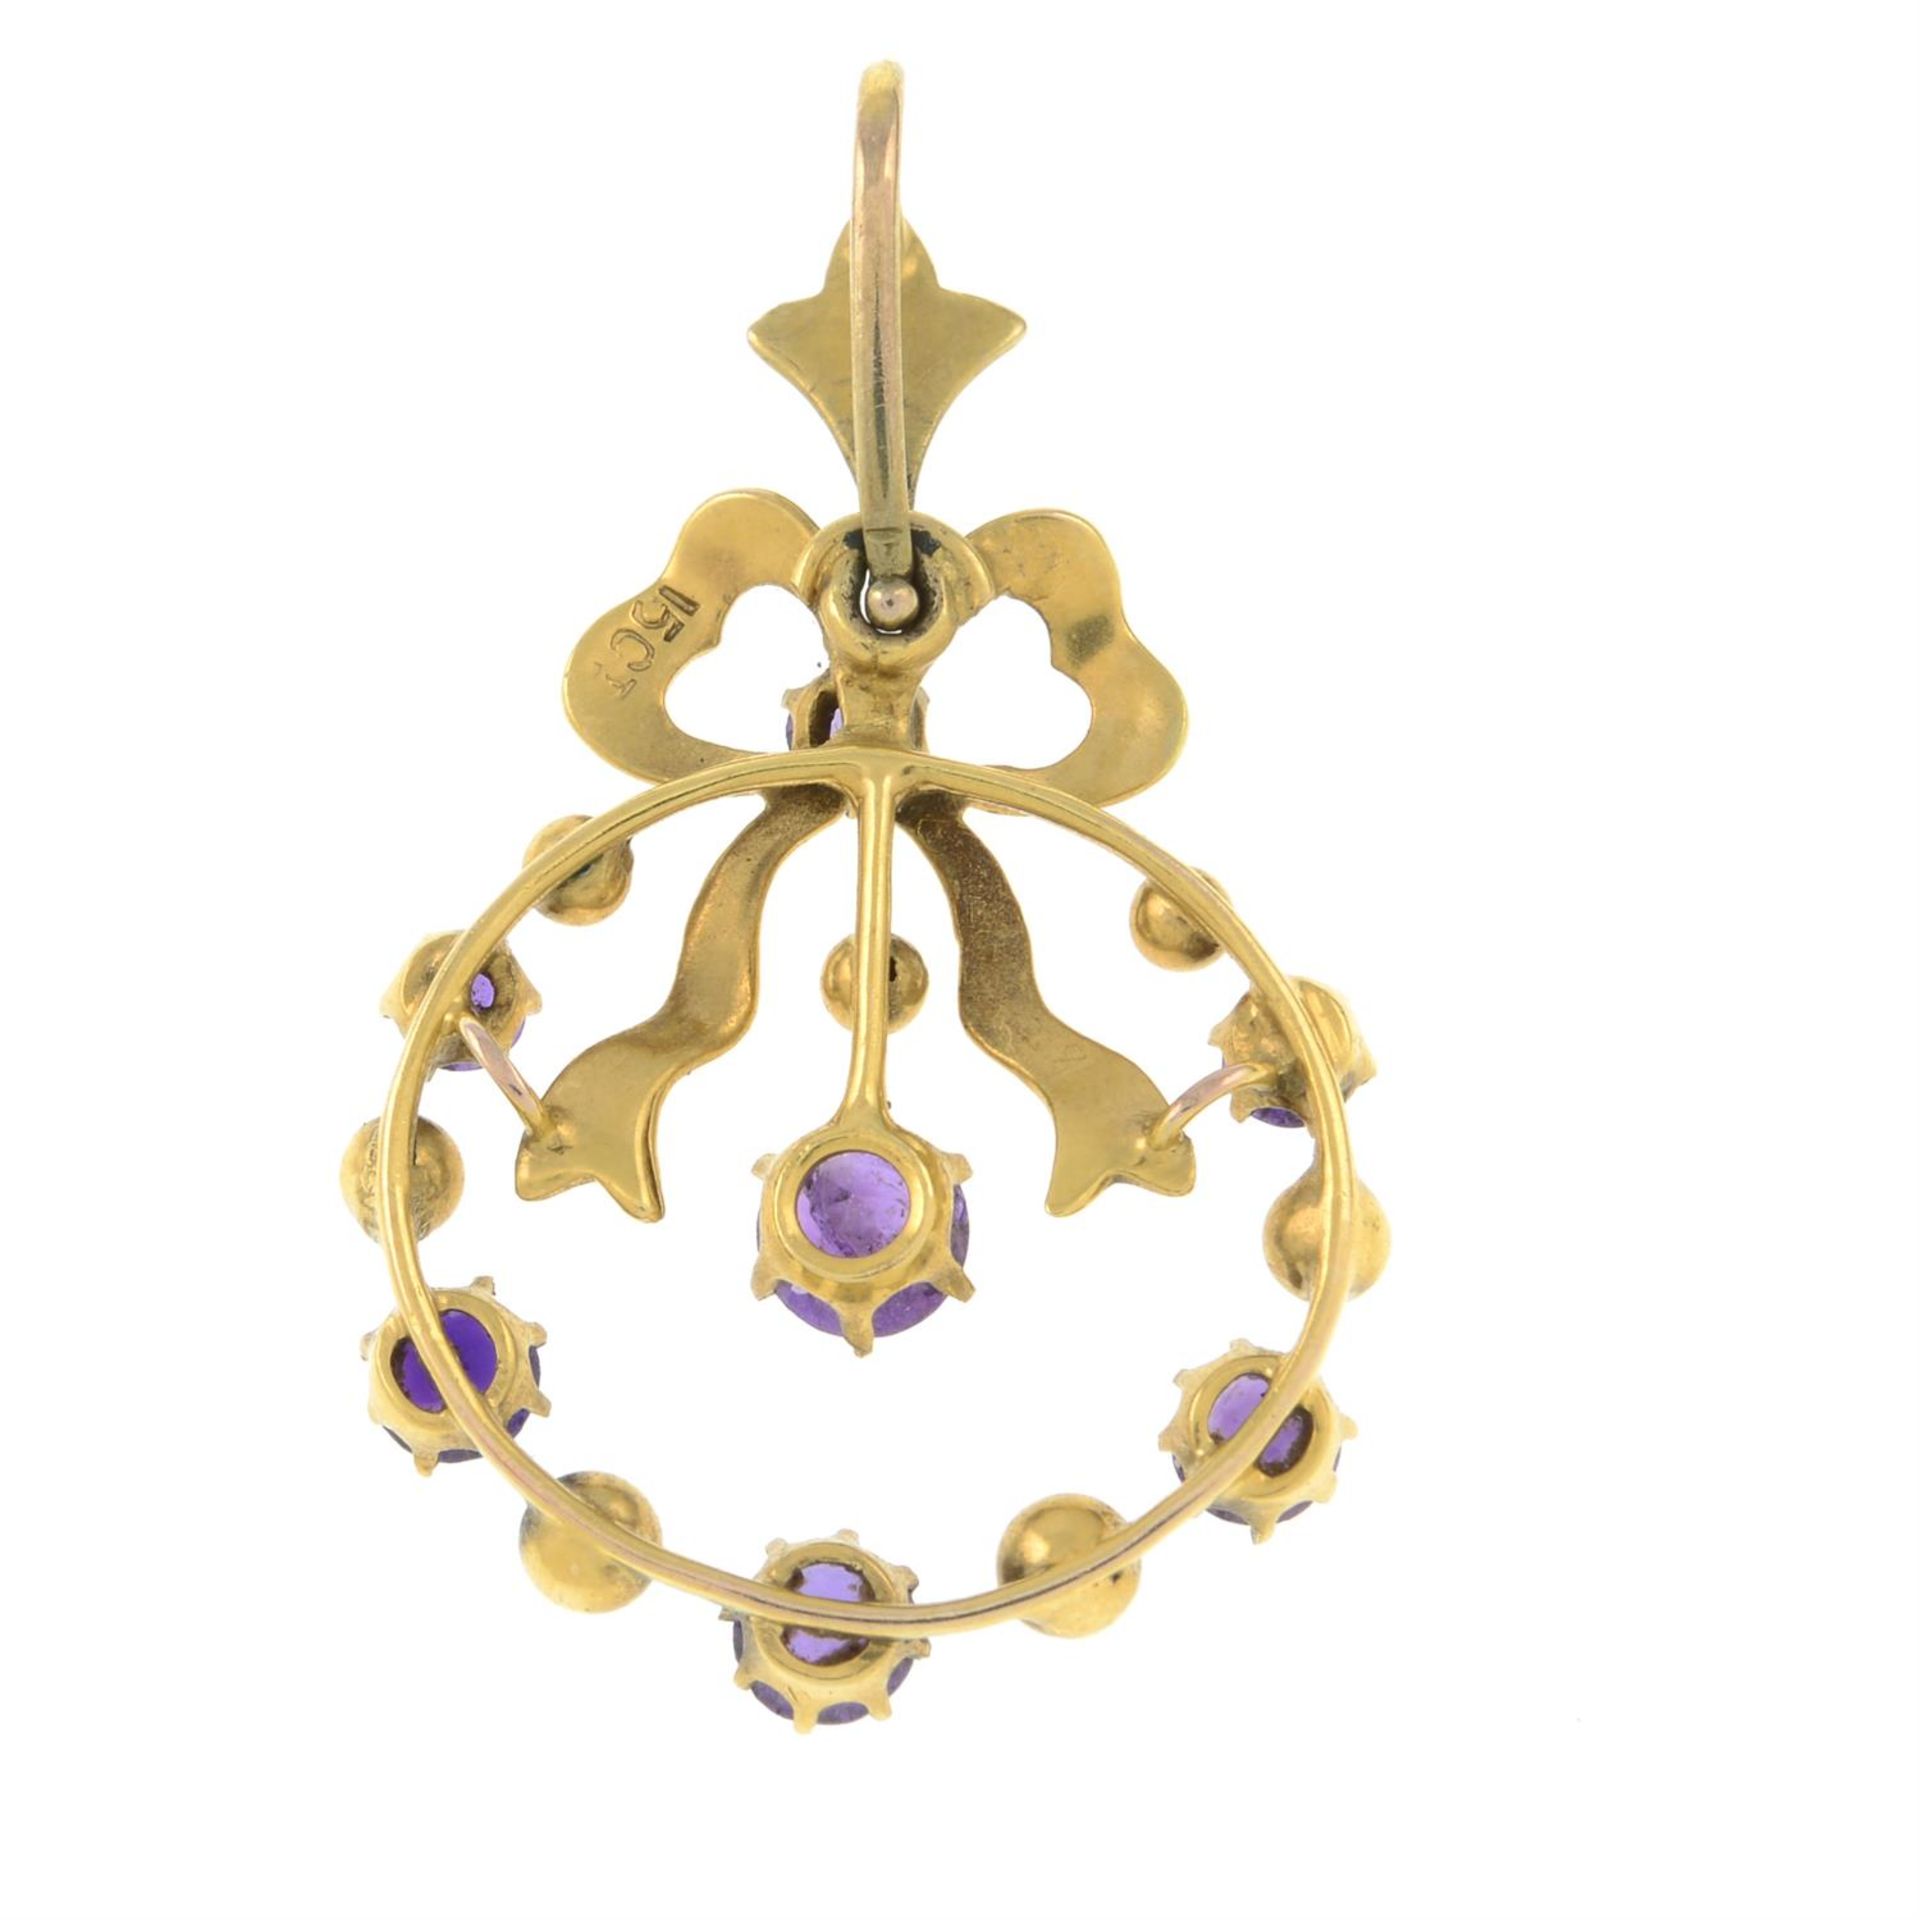 An early 20th century 15ct gold amethyst pendant. - Image 2 of 2